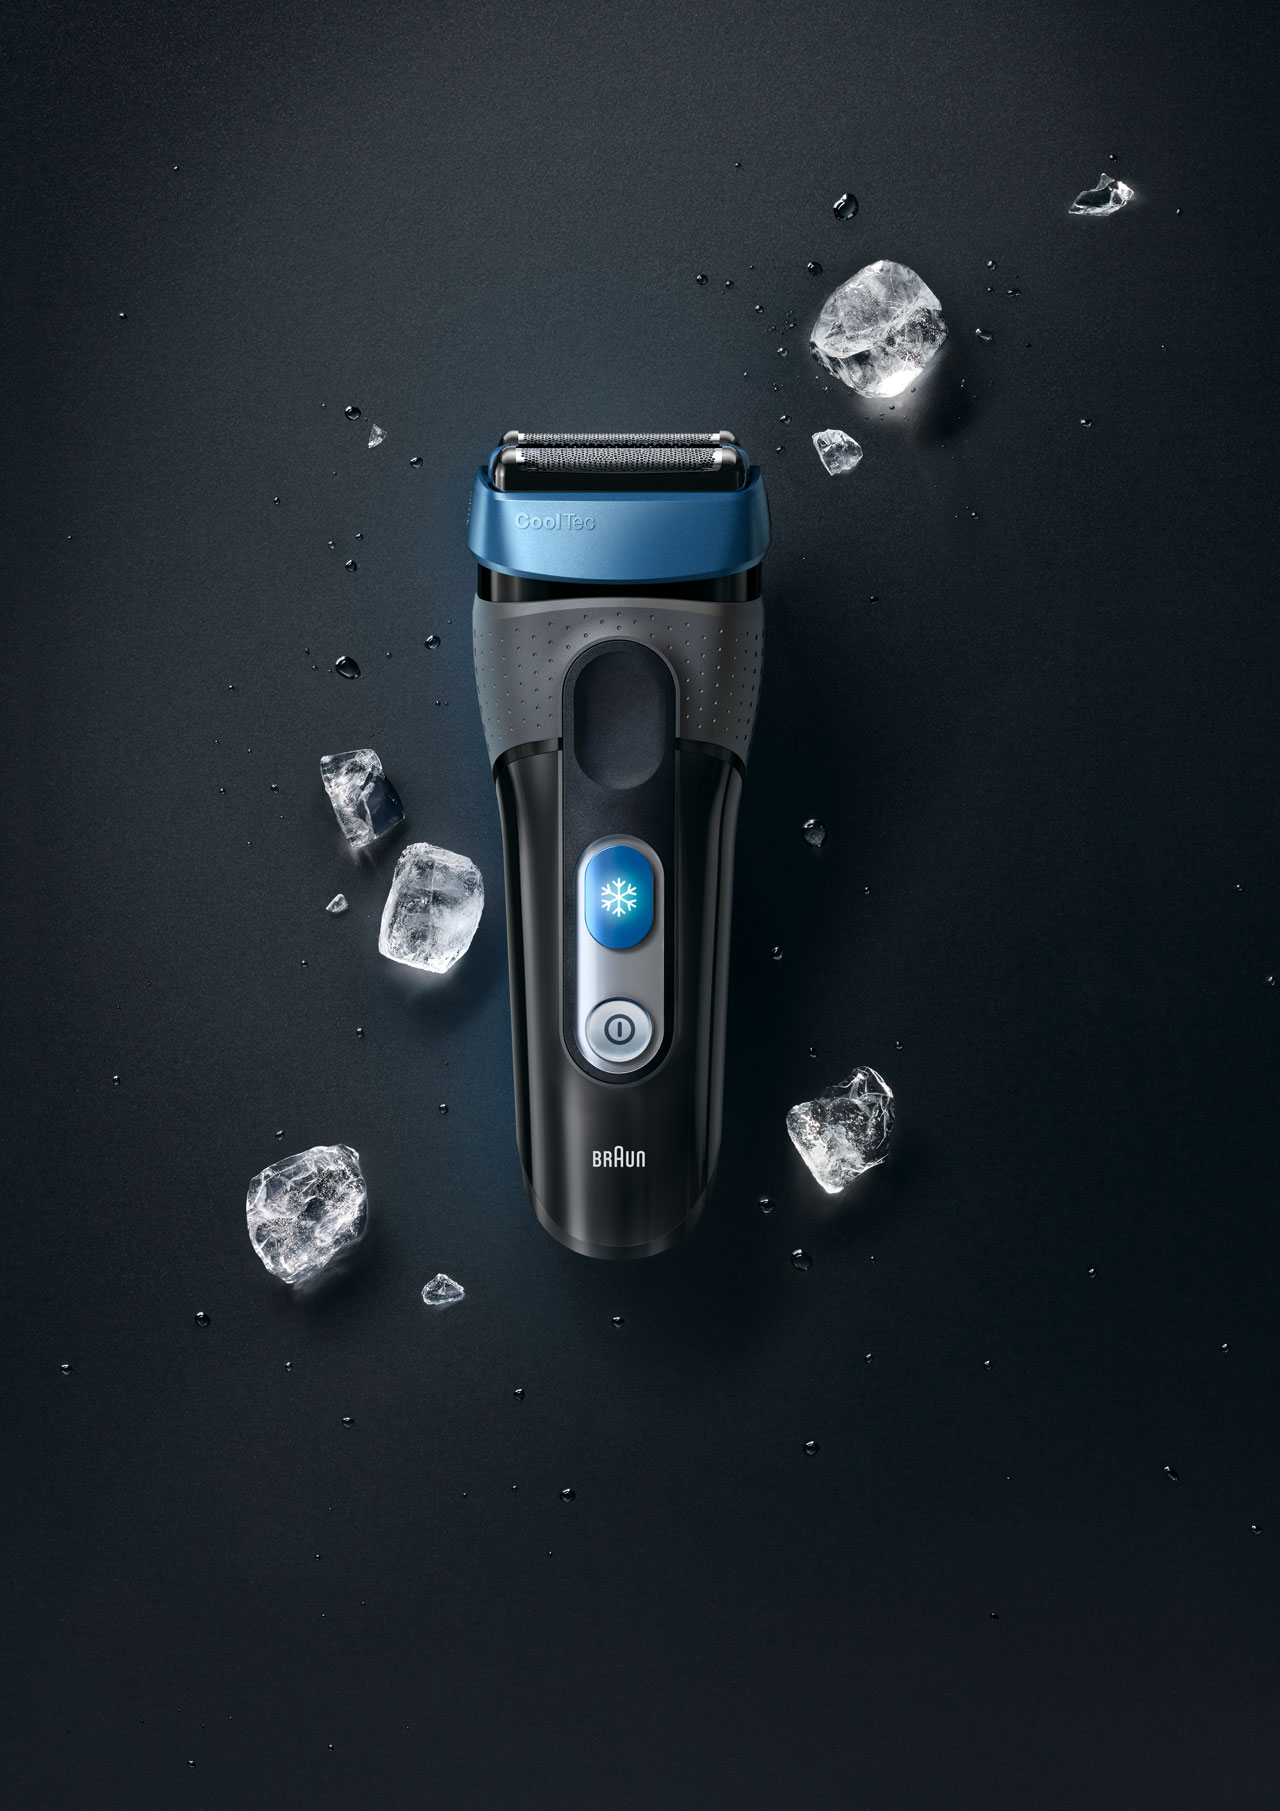 Black background with grey shaver and ice cubs around it